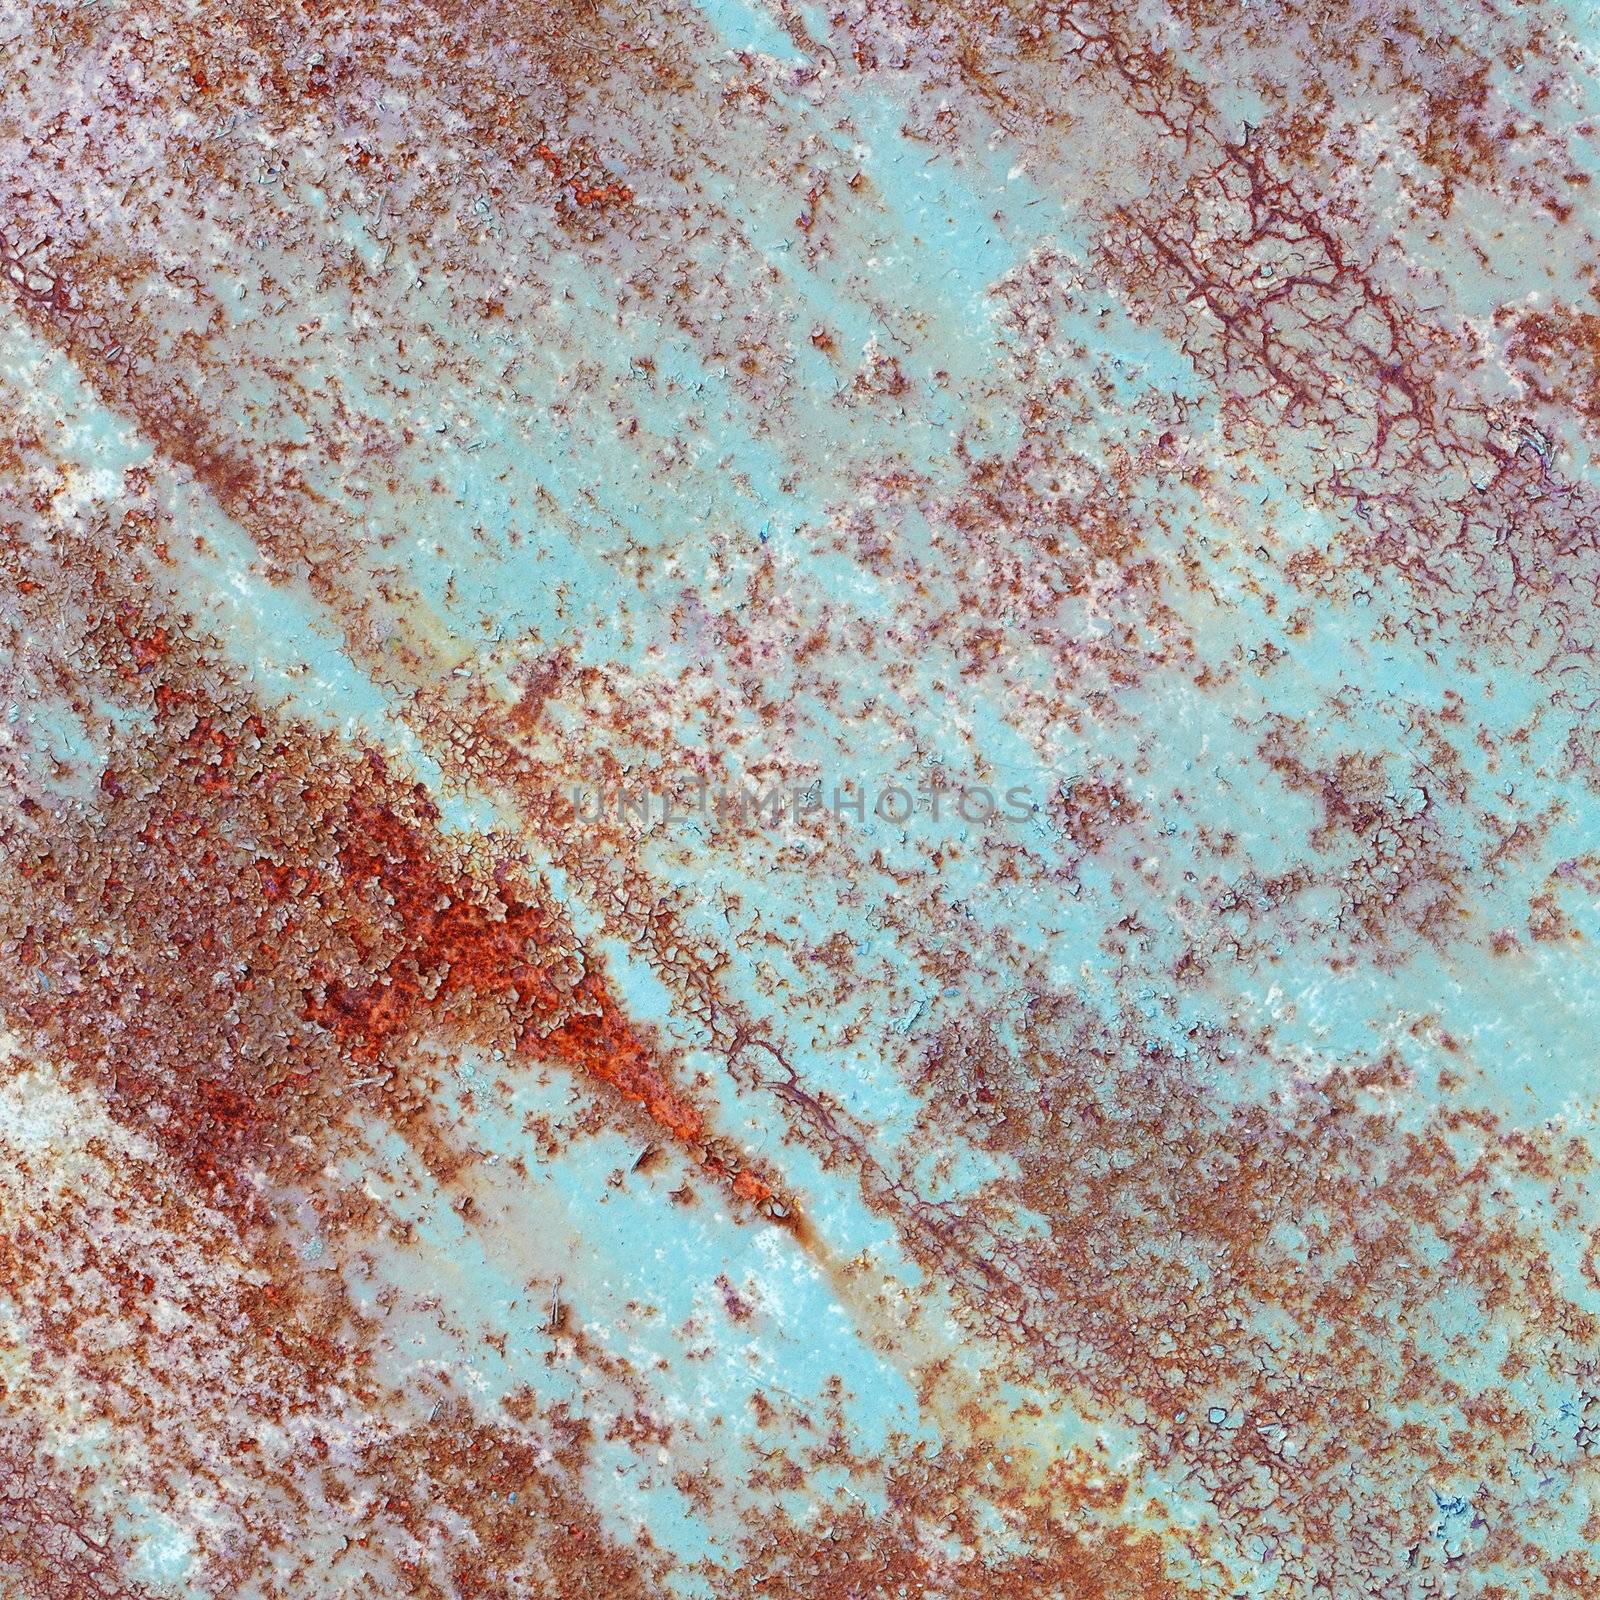 Square fragment of a rusty metal surface